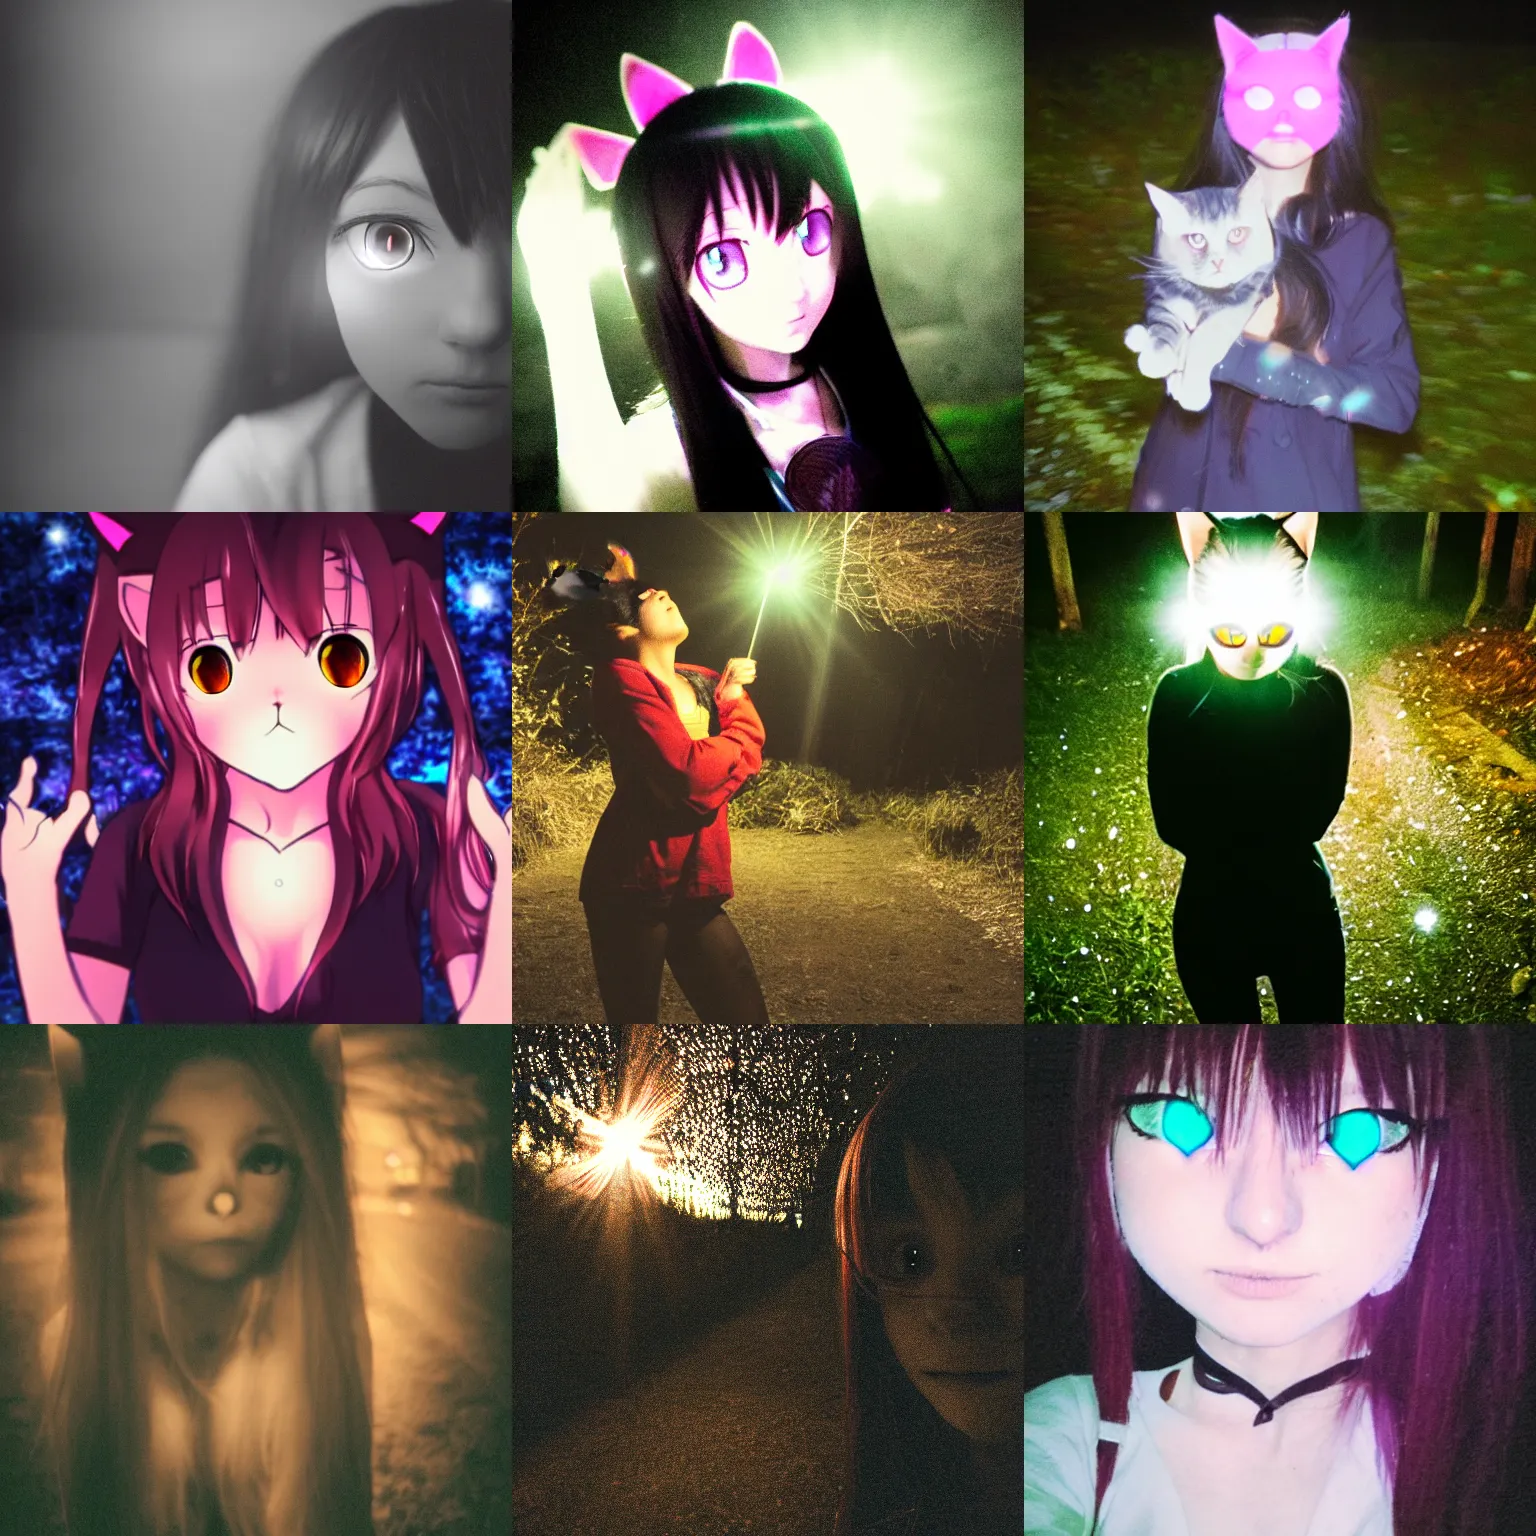 anime catgirl caught on a midnight trail cam